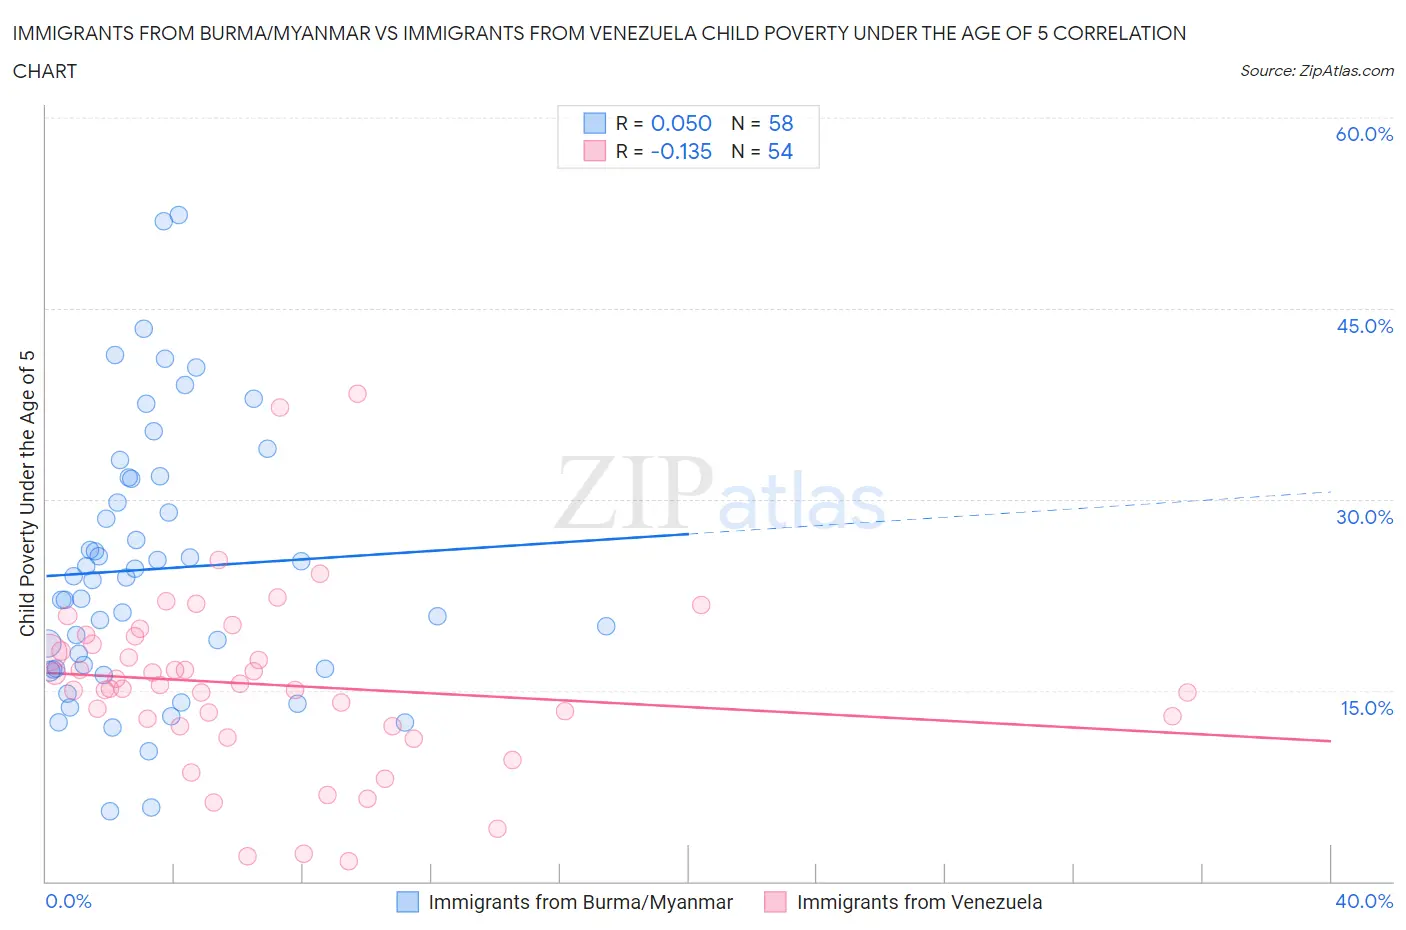 Immigrants from Burma/Myanmar vs Immigrants from Venezuela Child Poverty Under the Age of 5